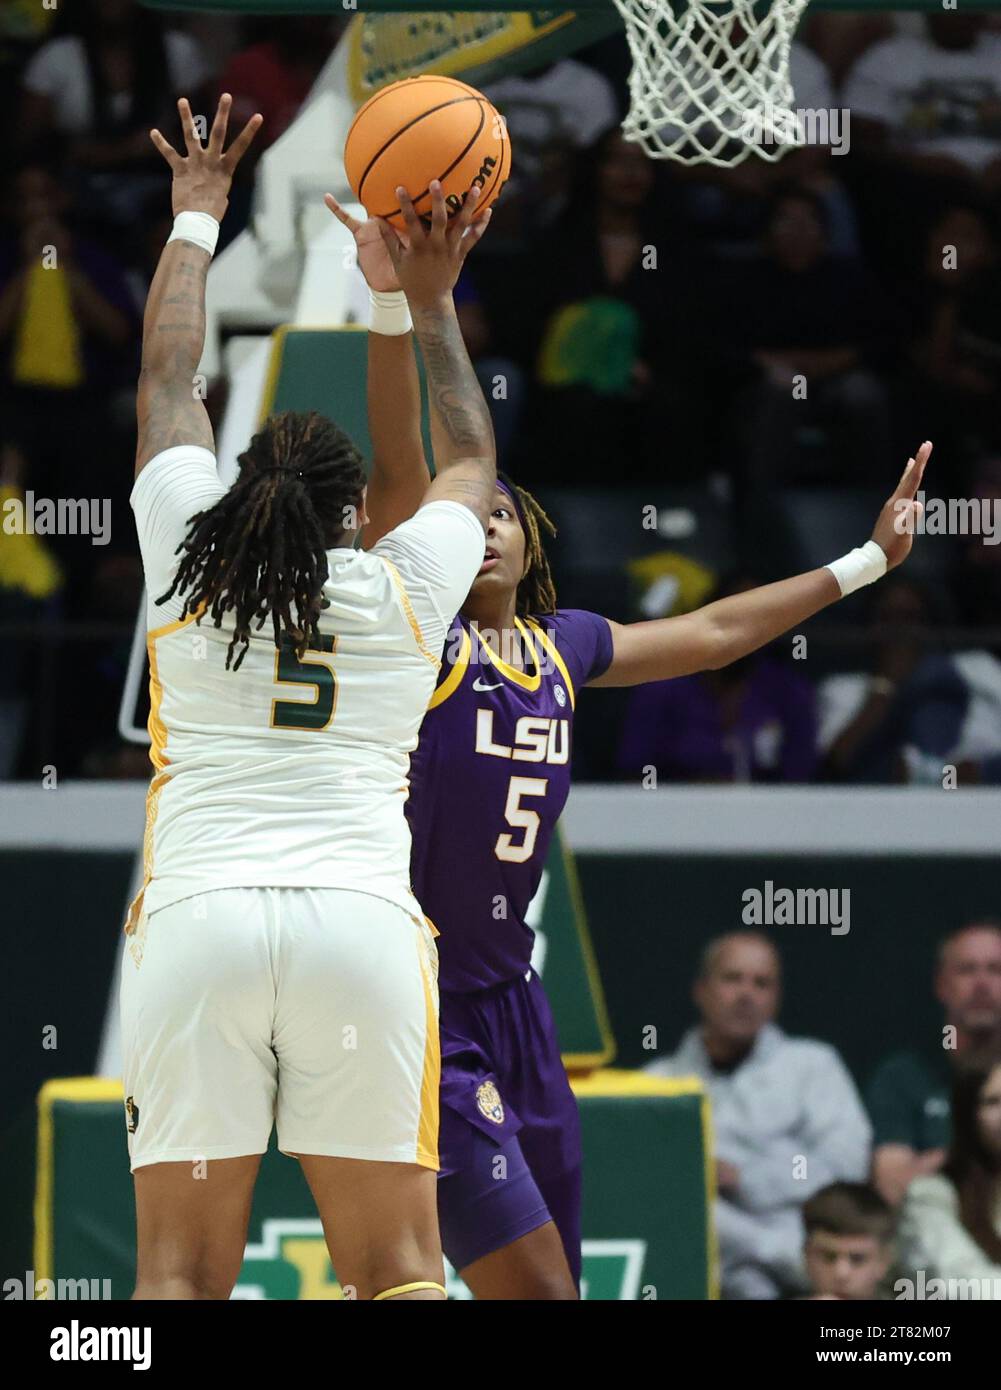 Hammond, USA. 17th Nov, 2023. SE Louisiana Lady Lions guard Taylor Bell (5) shoots a jumper against LSU Lady Tigers forward Sa'Myah Smith (5) during a women's college basketball game at the University Center in Hammond, Louisiana on Friday, November 17, 2023. (Photo by Peter G. Forest/Sipa USA) Credit: Sipa USA/Alamy Live News Stock Photo